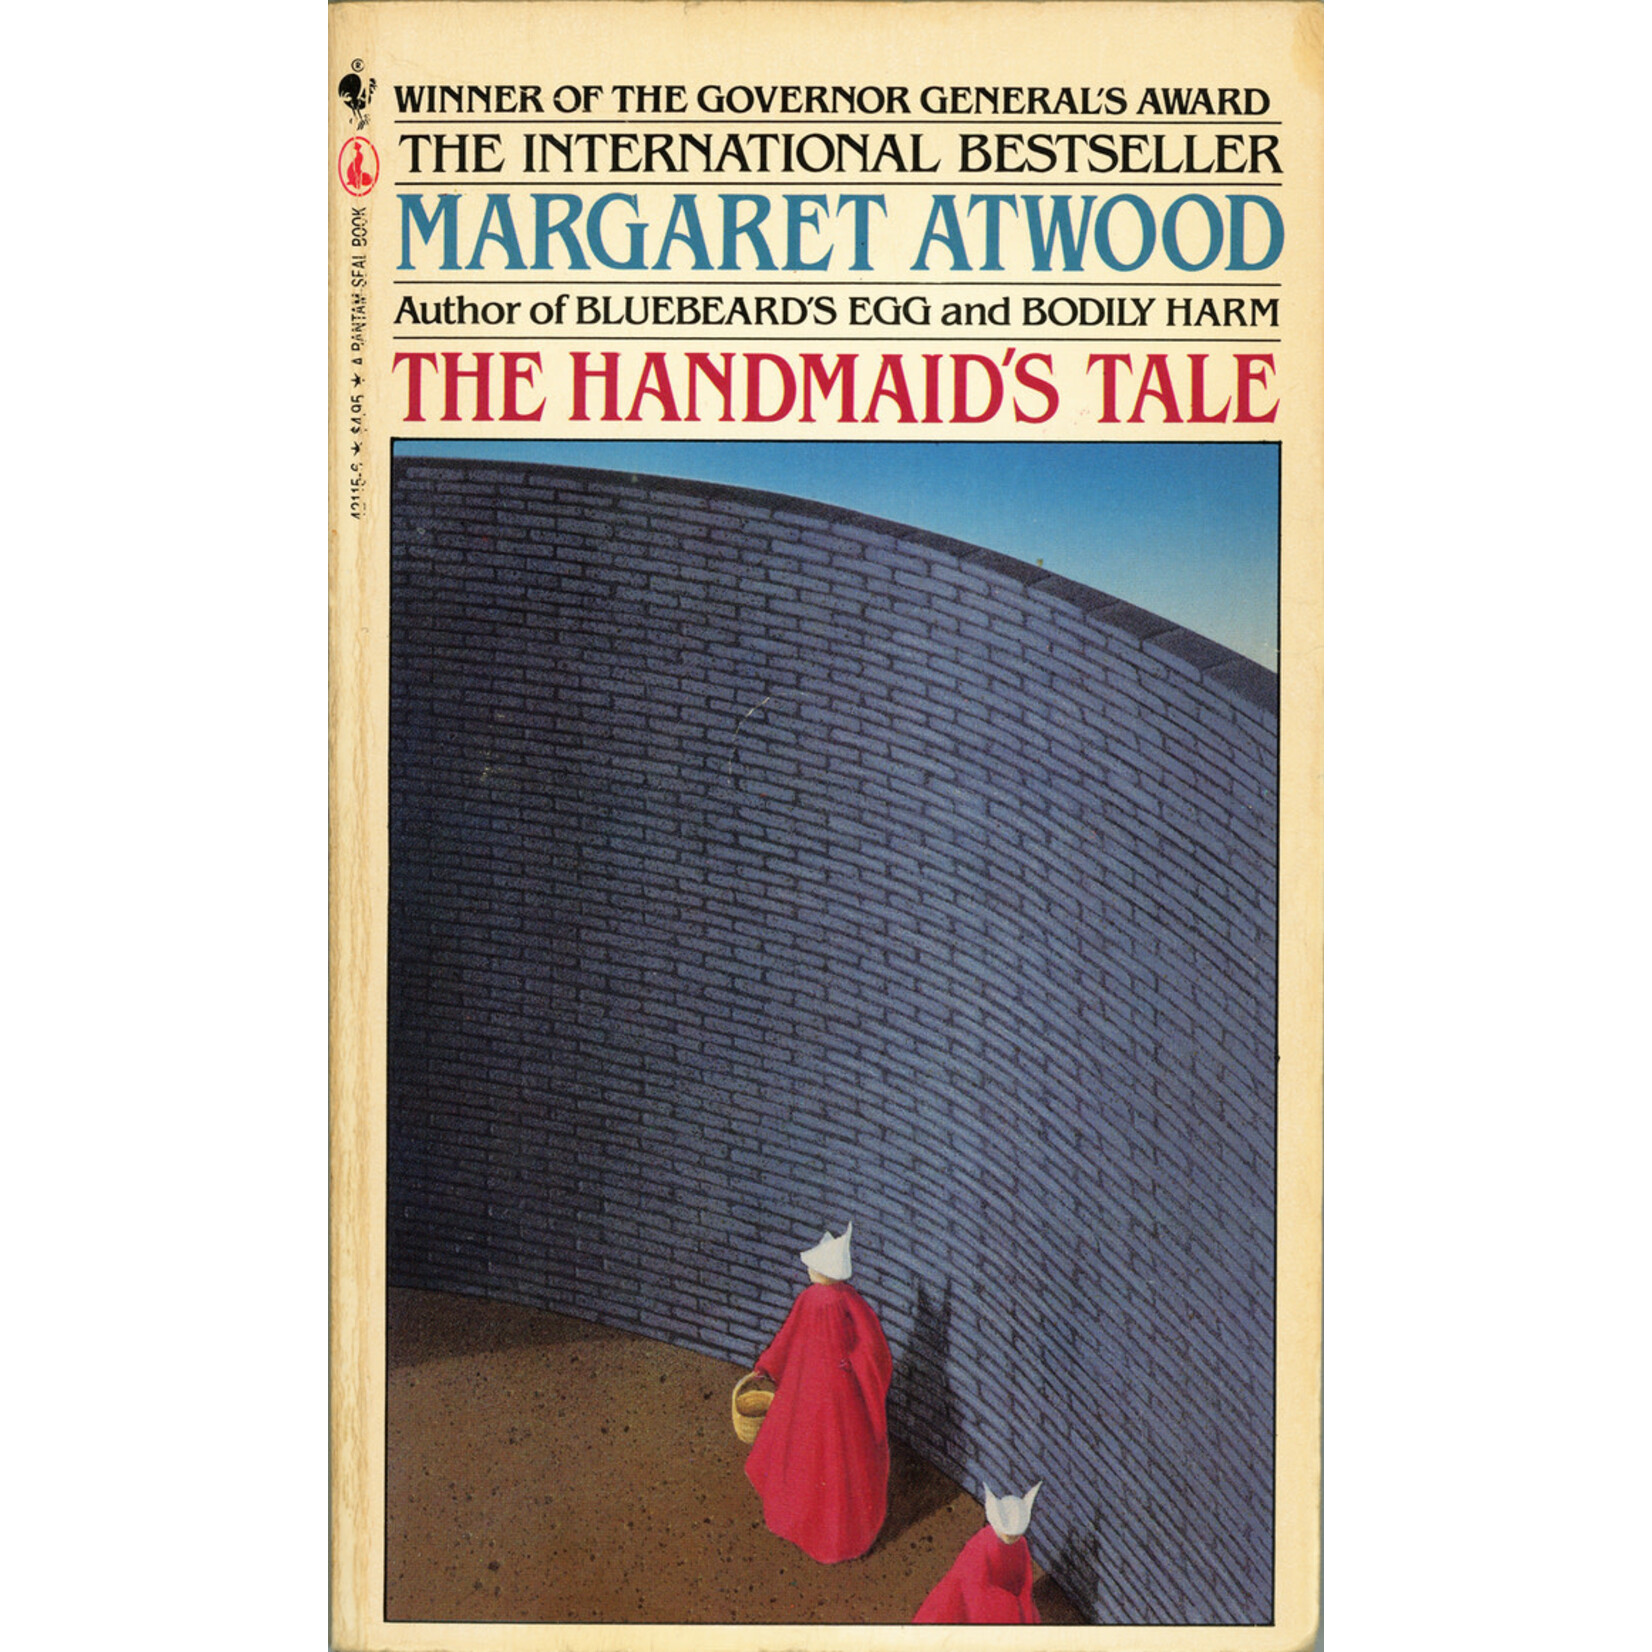 Atwood, Margaret Atwood, Margaret (FI) The Handmaid's Tale (PB)